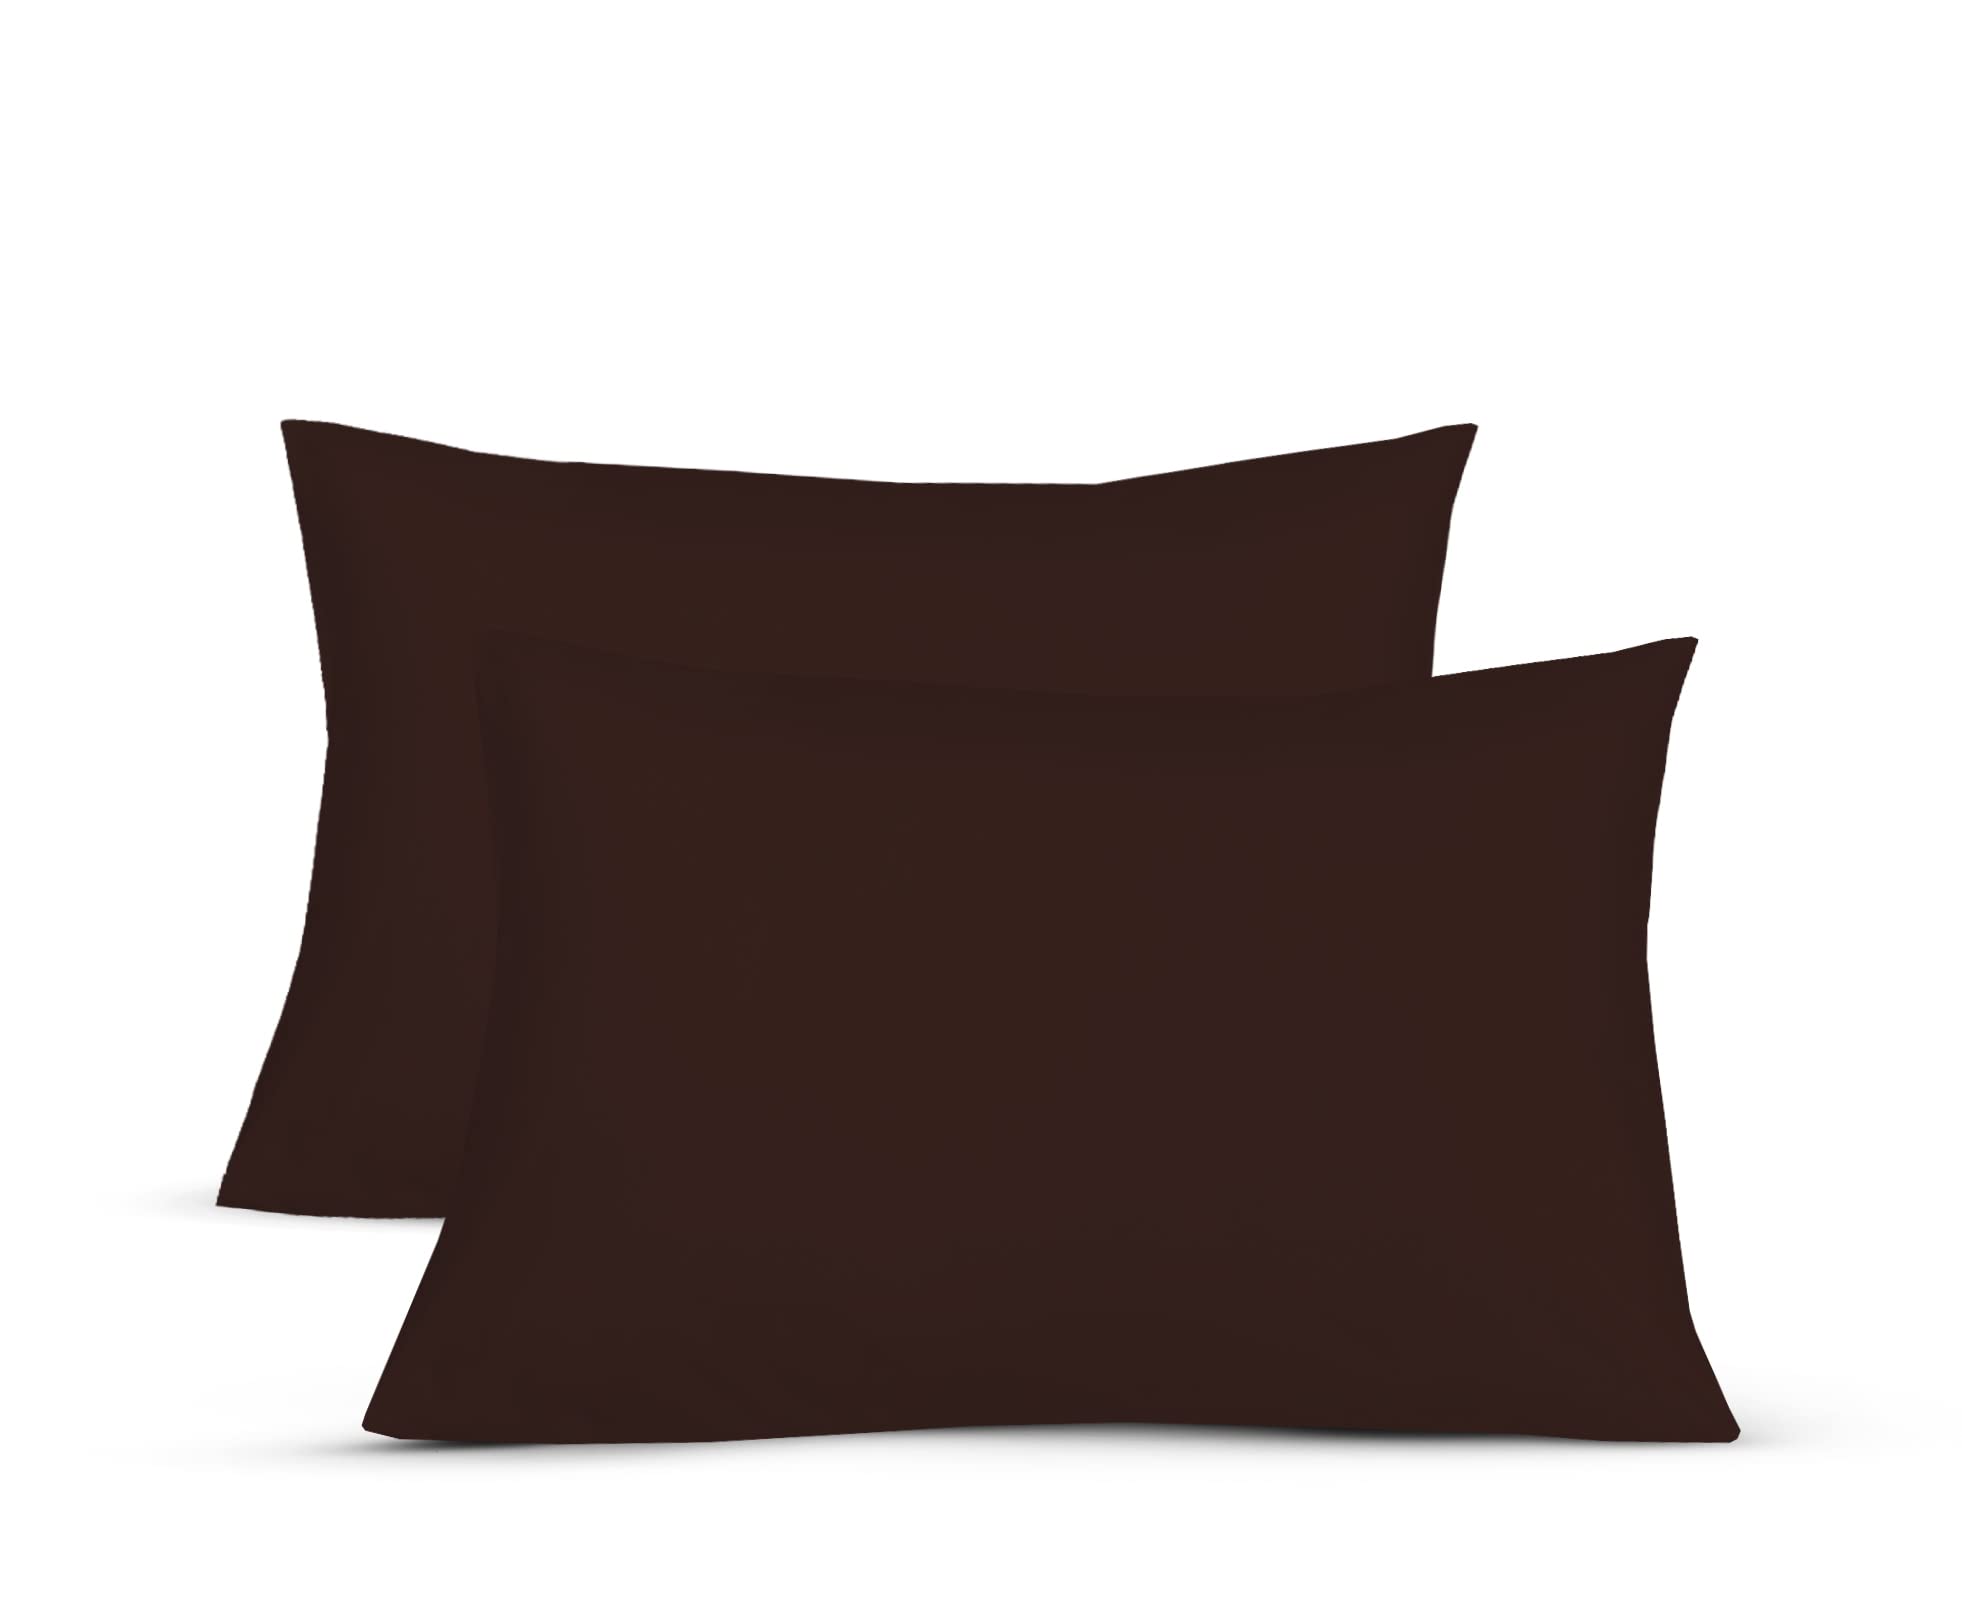 Sapphire Collection 2 x Luxury Pair of Housewife Pillow Cases Non Iron Percale Bedroom Bedding Pillow Cover (Chocolate)